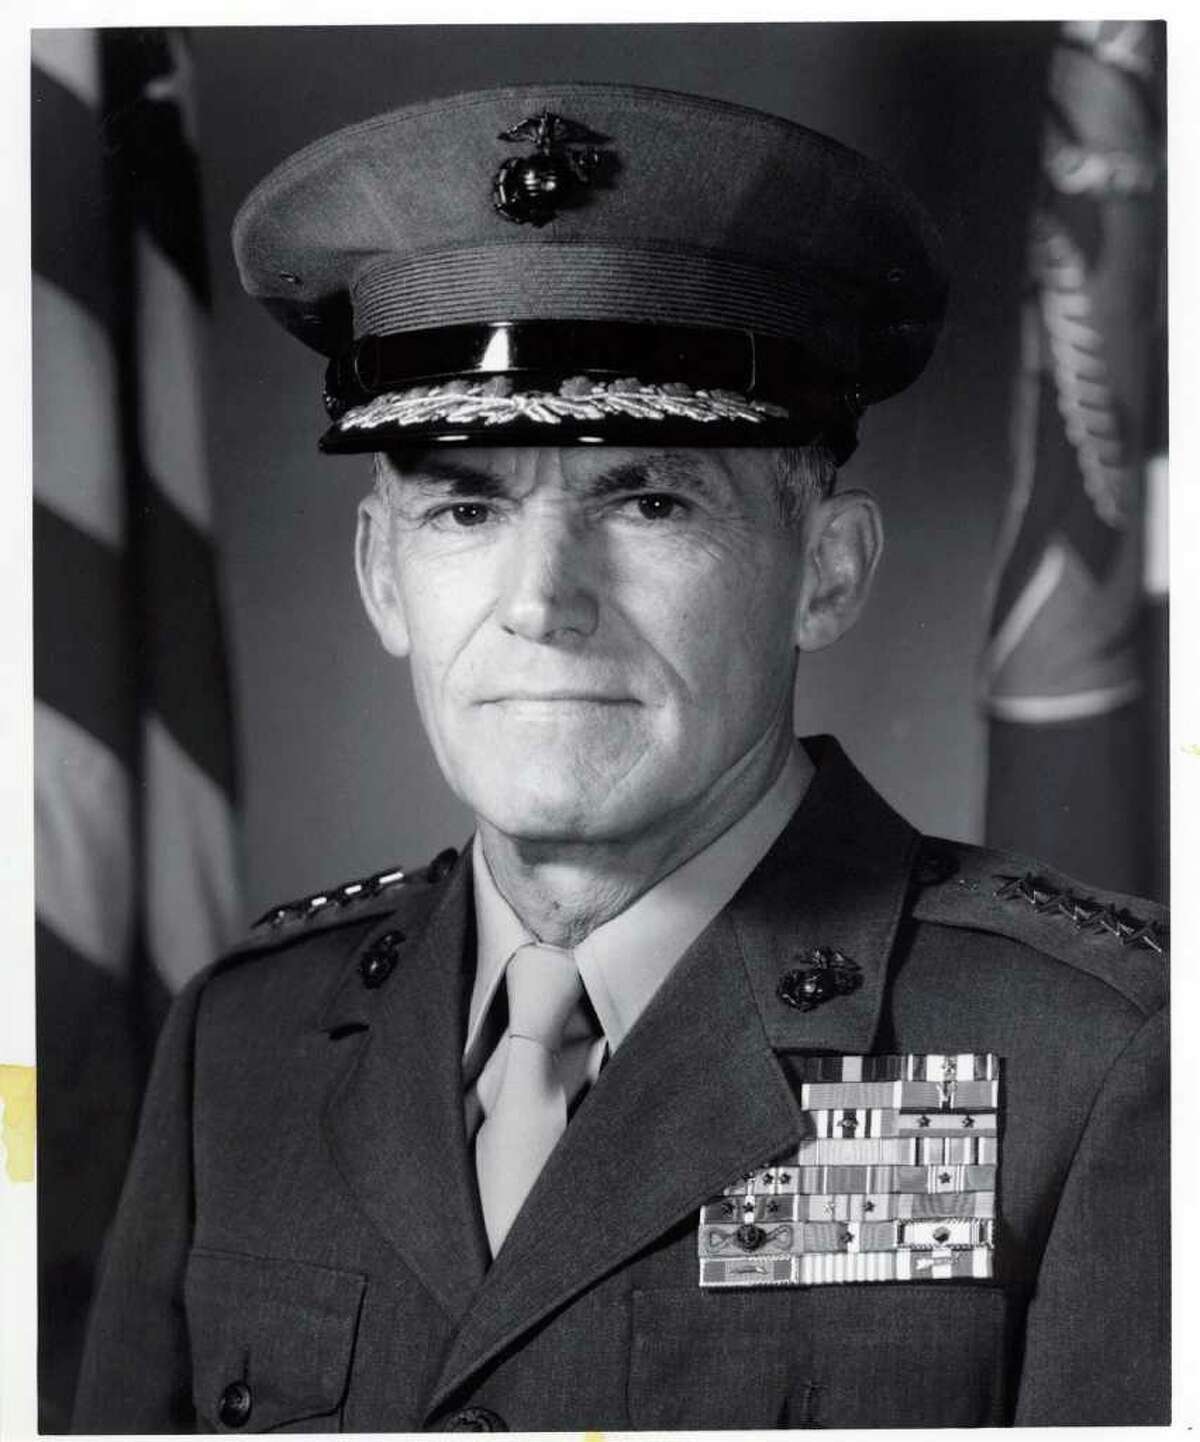 Ansonia, Conn. General Samuel Jaskilka, who served as Assistant Commandant of the Marine Corps, died on Jan. 15. He retired from the Corps in 1978 after 36 years of service. He was buried Thursday, Jan. 26 in Arlington National Cemetery.